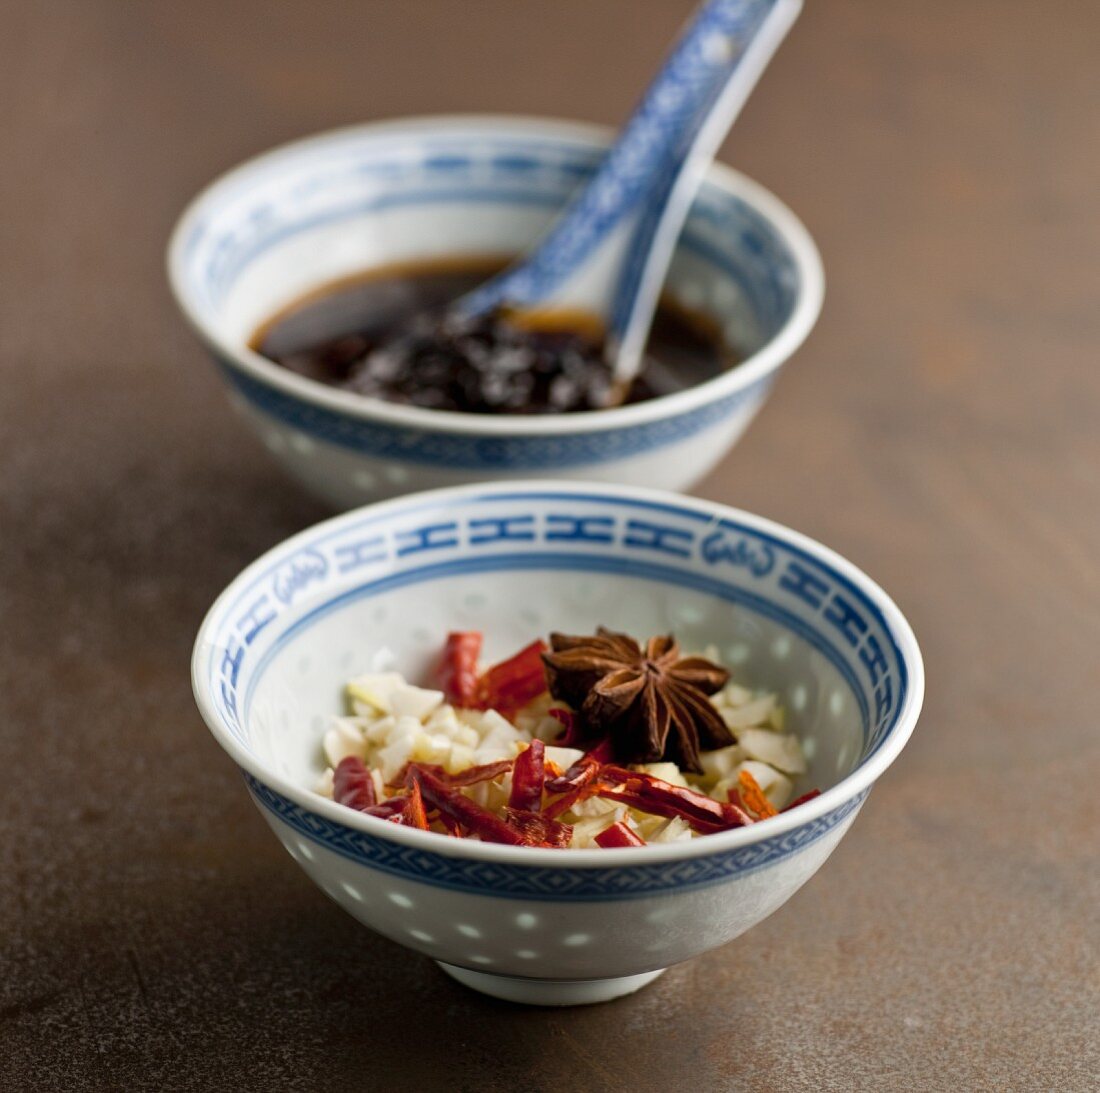 Chinese Spice Bowl; Chopped Onion, Garlic, Red Pepper and Star Anise; Black Bean Sauce in Bowl in Background